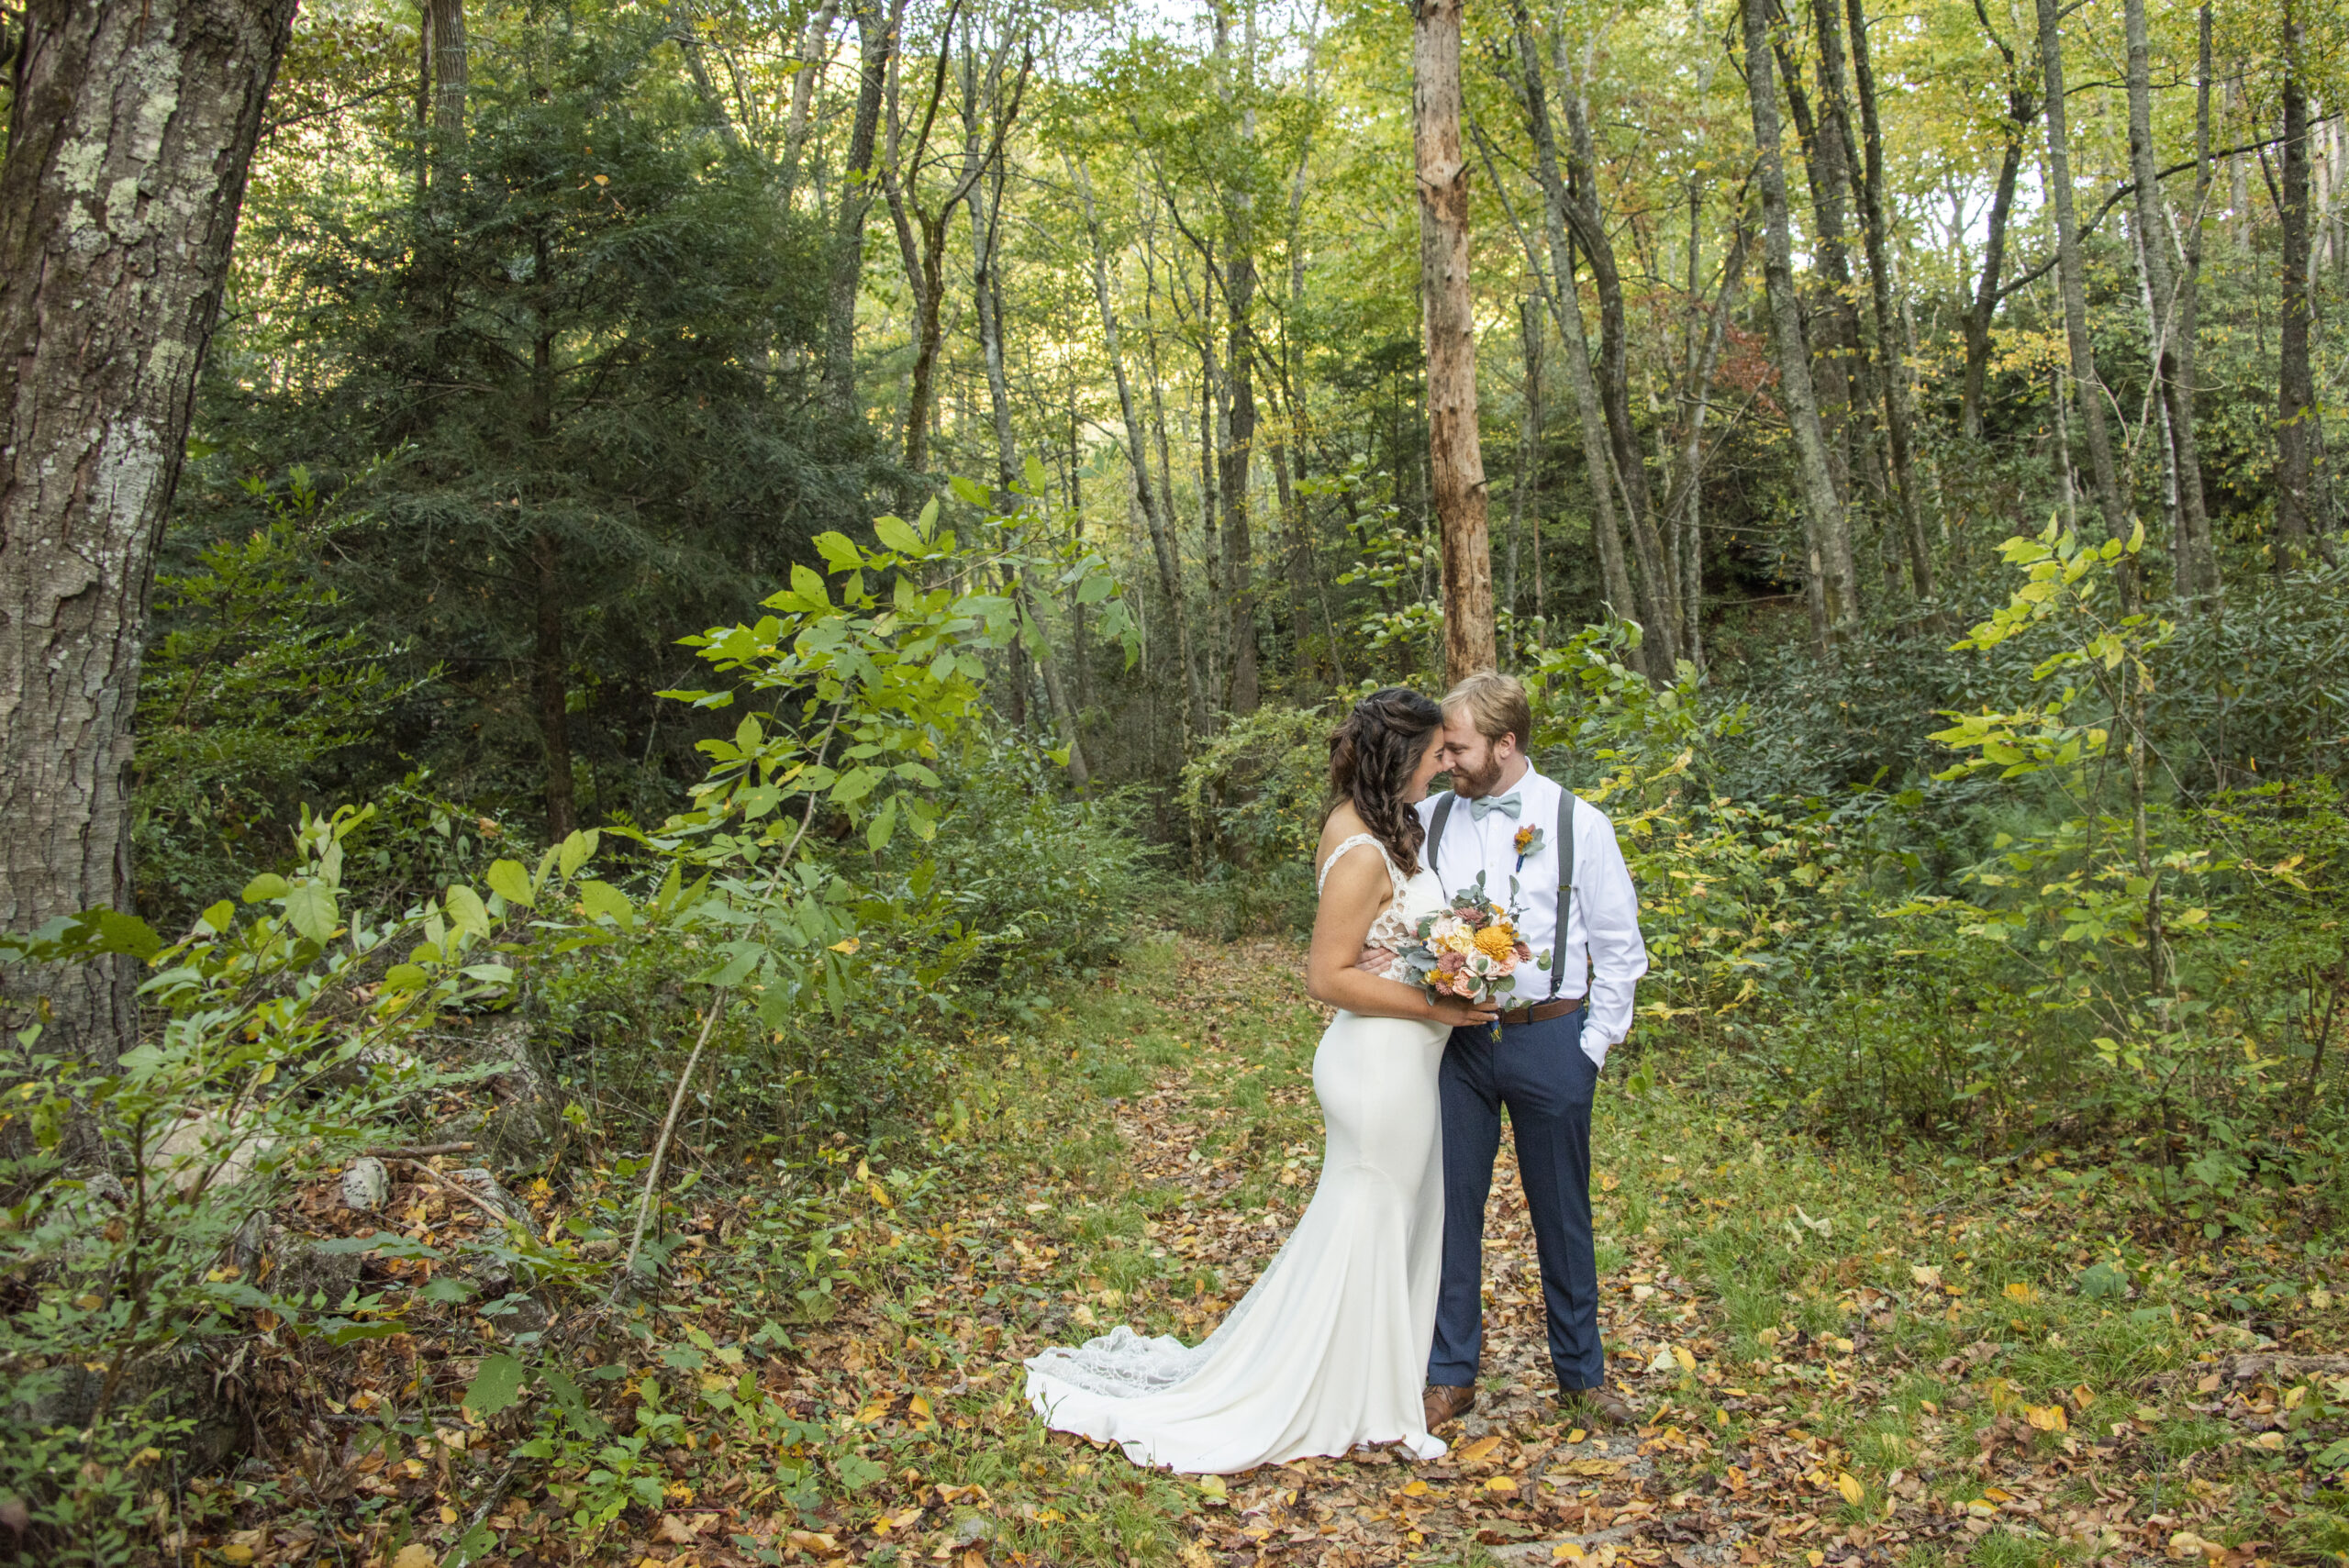 Waterfall Wedding in NC Mountains During Fall